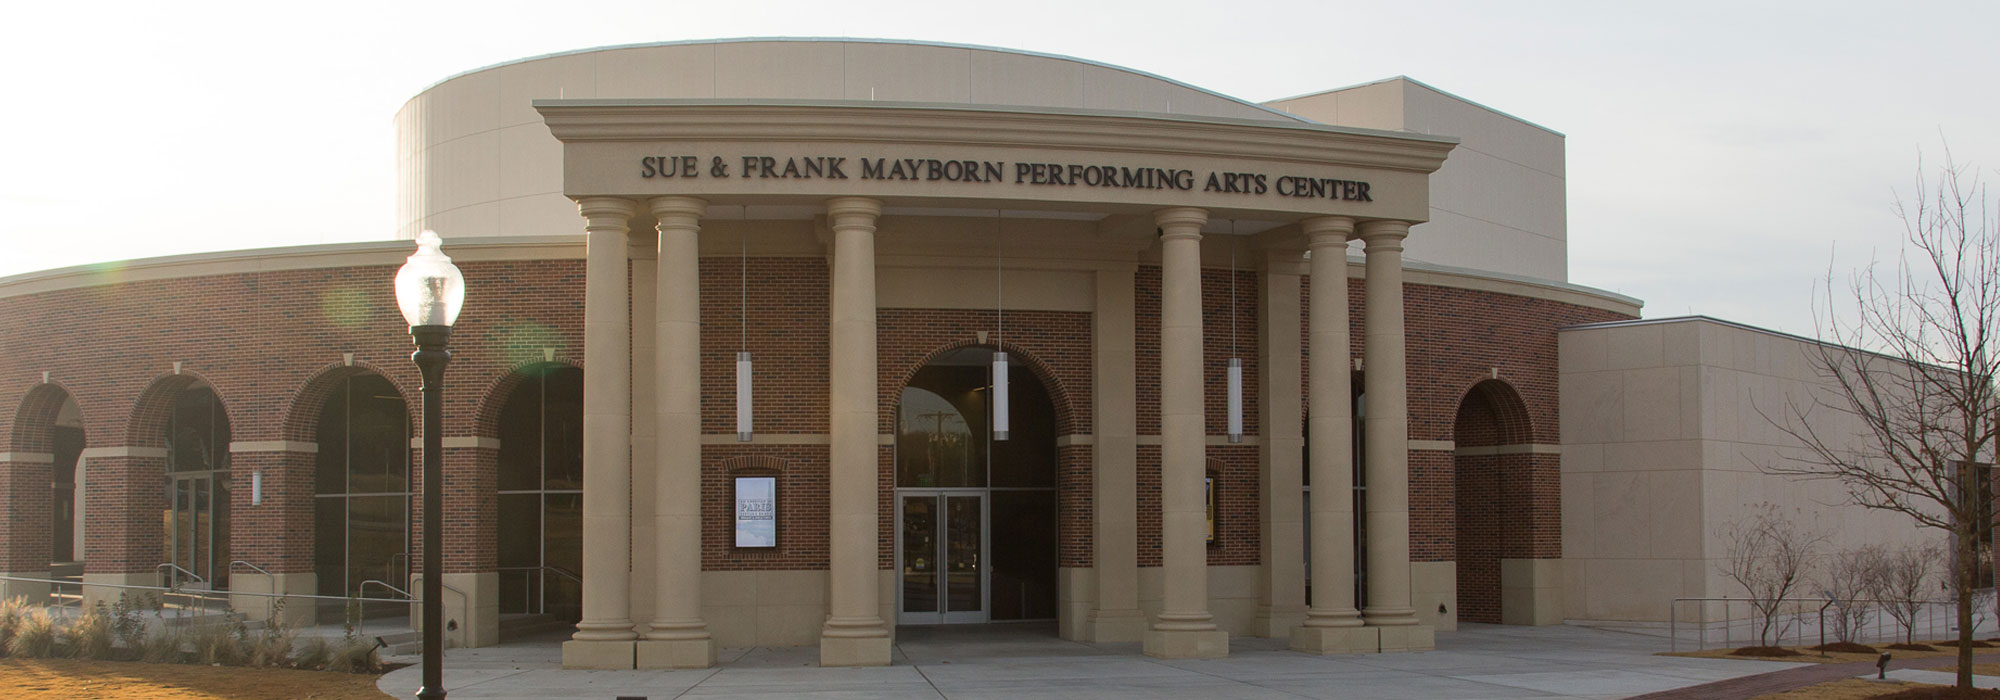 About the Performing Arts Center